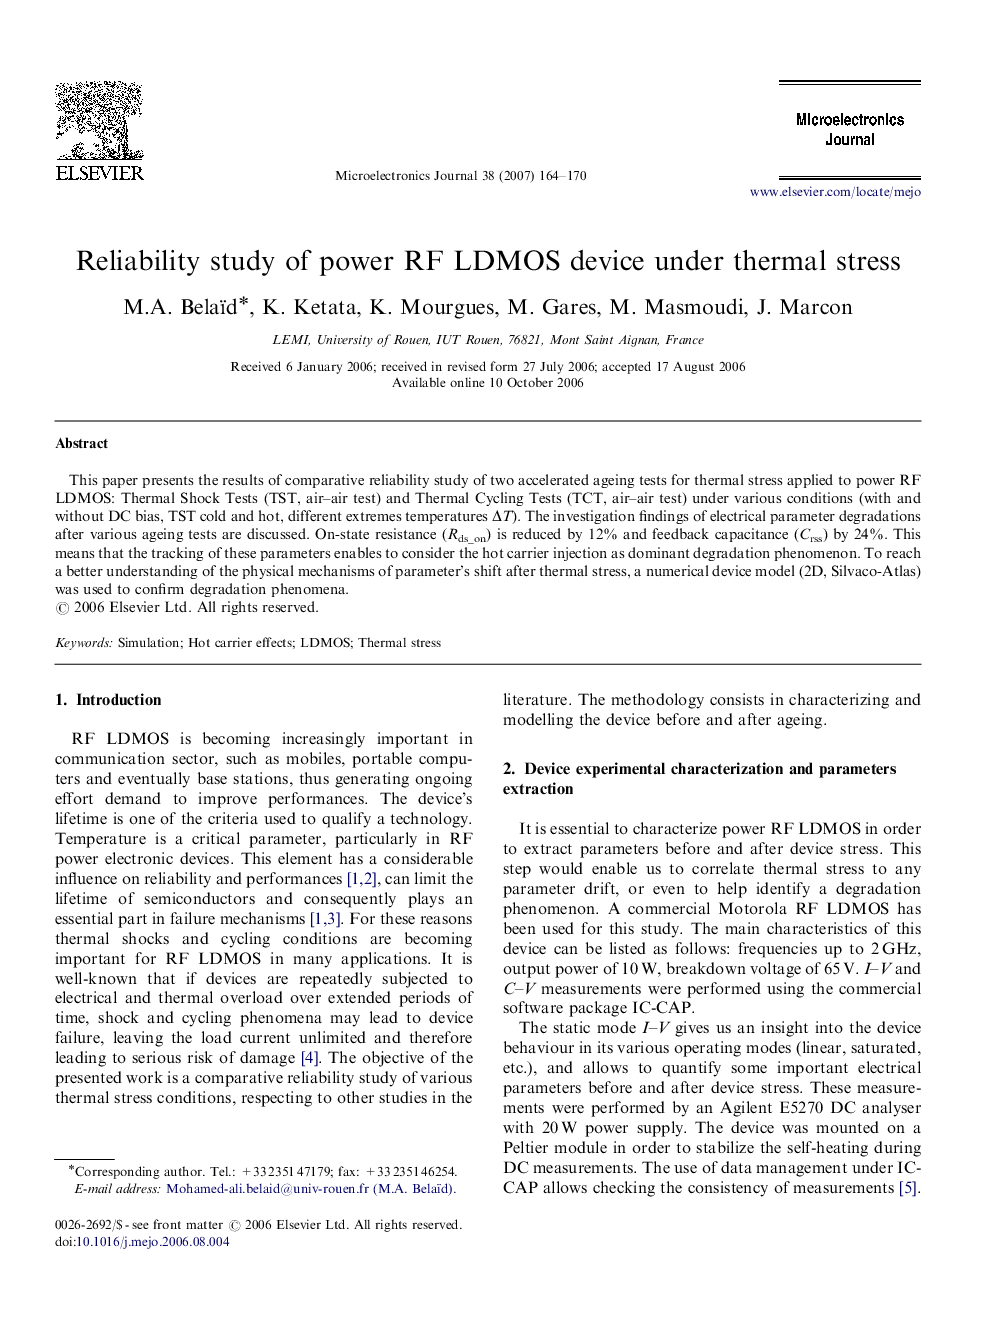 Reliability study of power RF LDMOS device under thermal stress